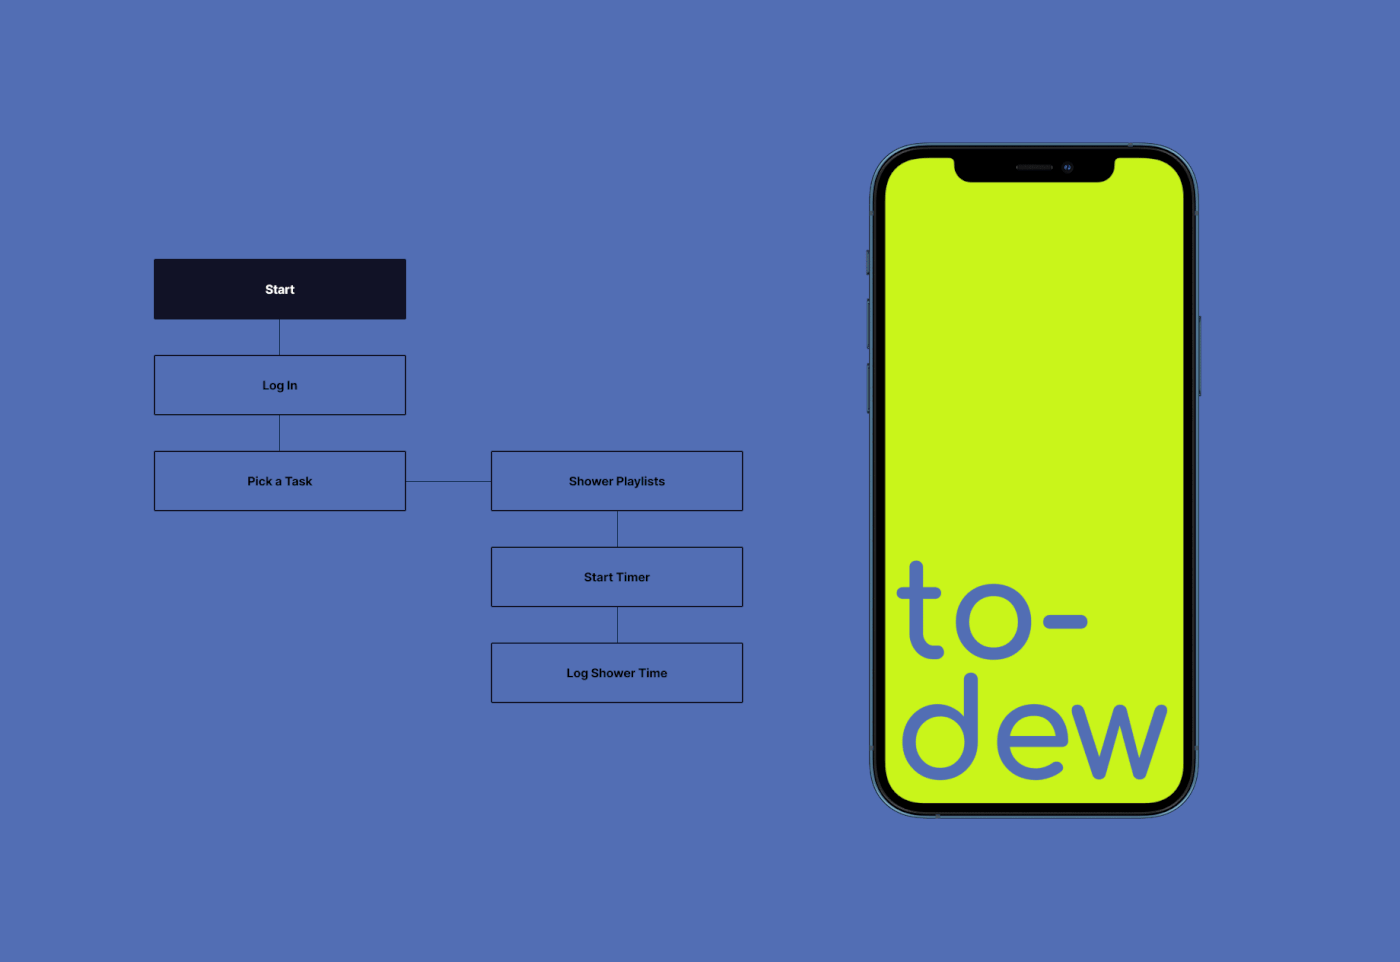 #appbranding #dew #research #todo #UI #userexperience #userinterface #UX #waterconservation